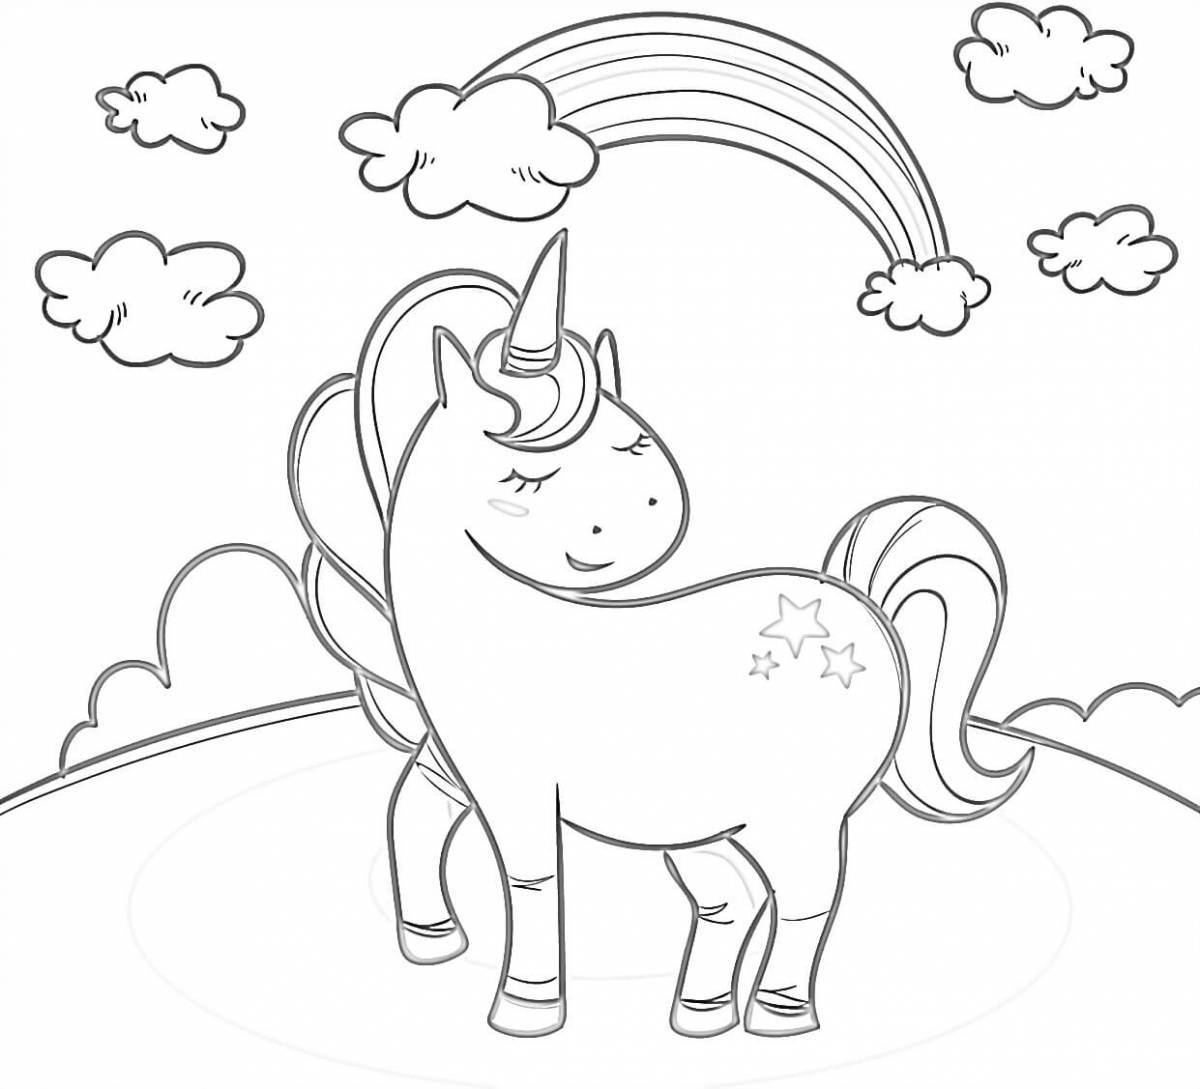 Adorable unicorn coloring book for kids 4-5 years old